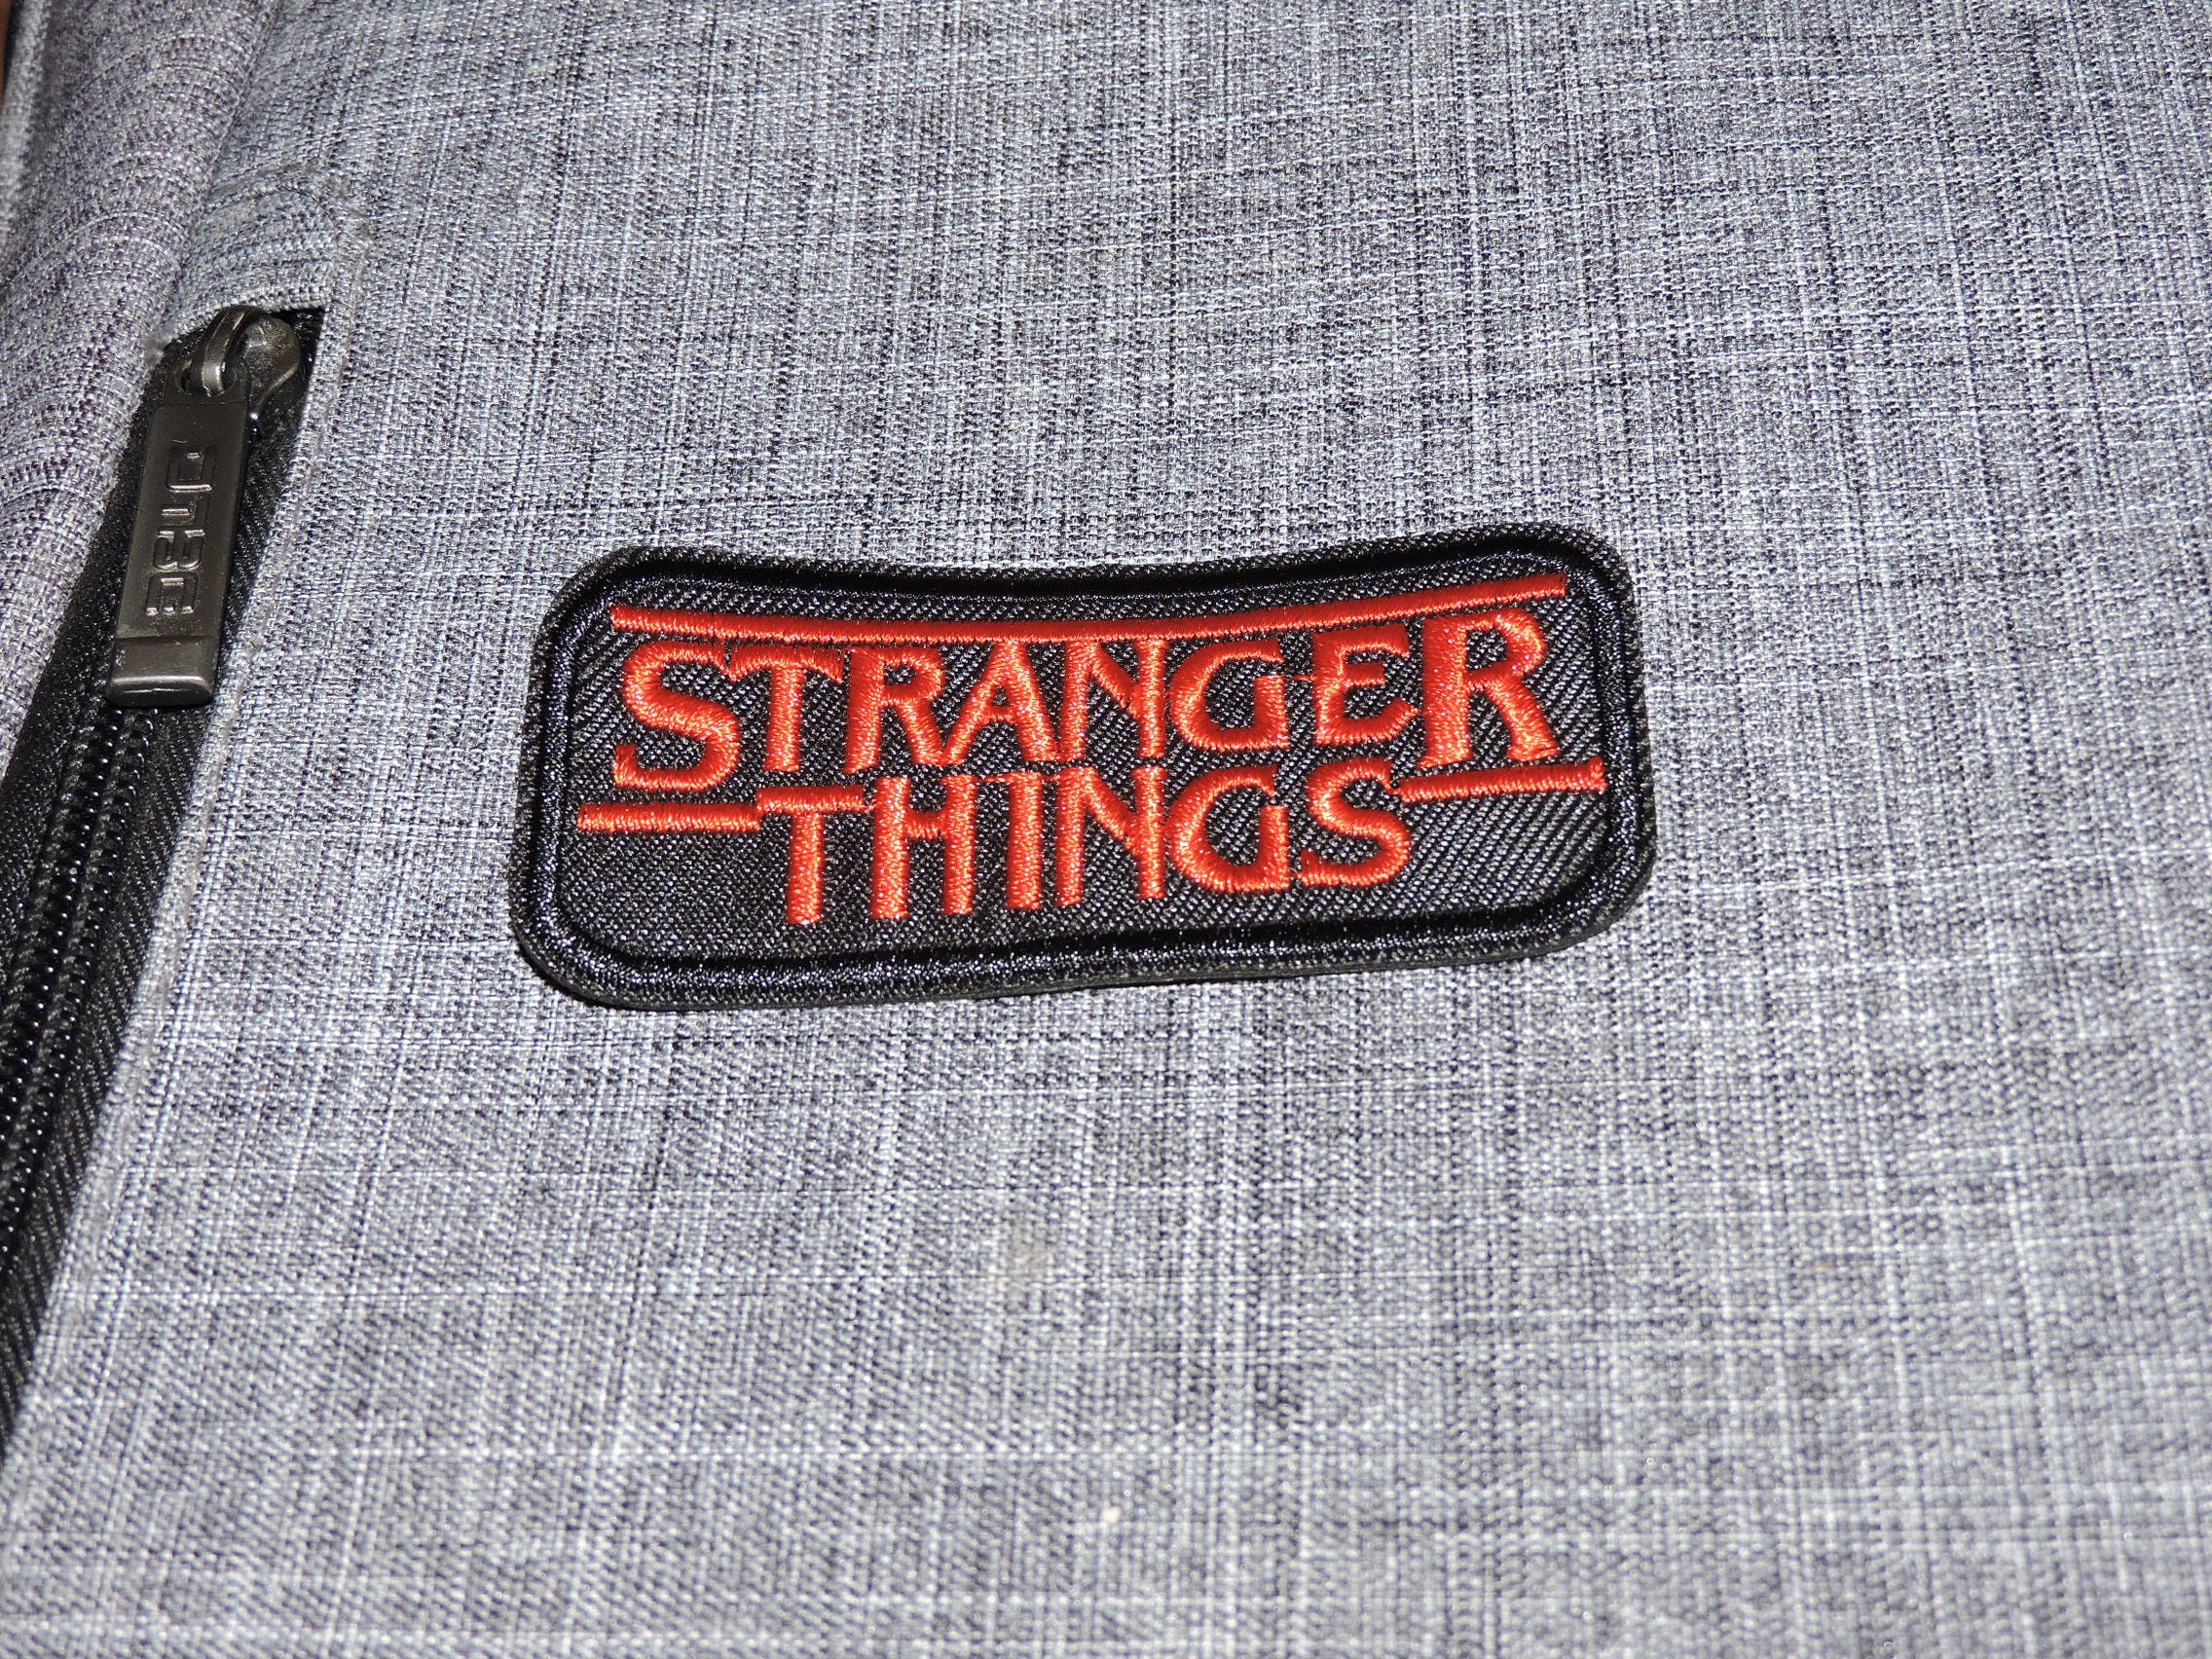 Lot of 8 STRANGER THINGS 3.25 Iron-On Clothing Patches | Etsy